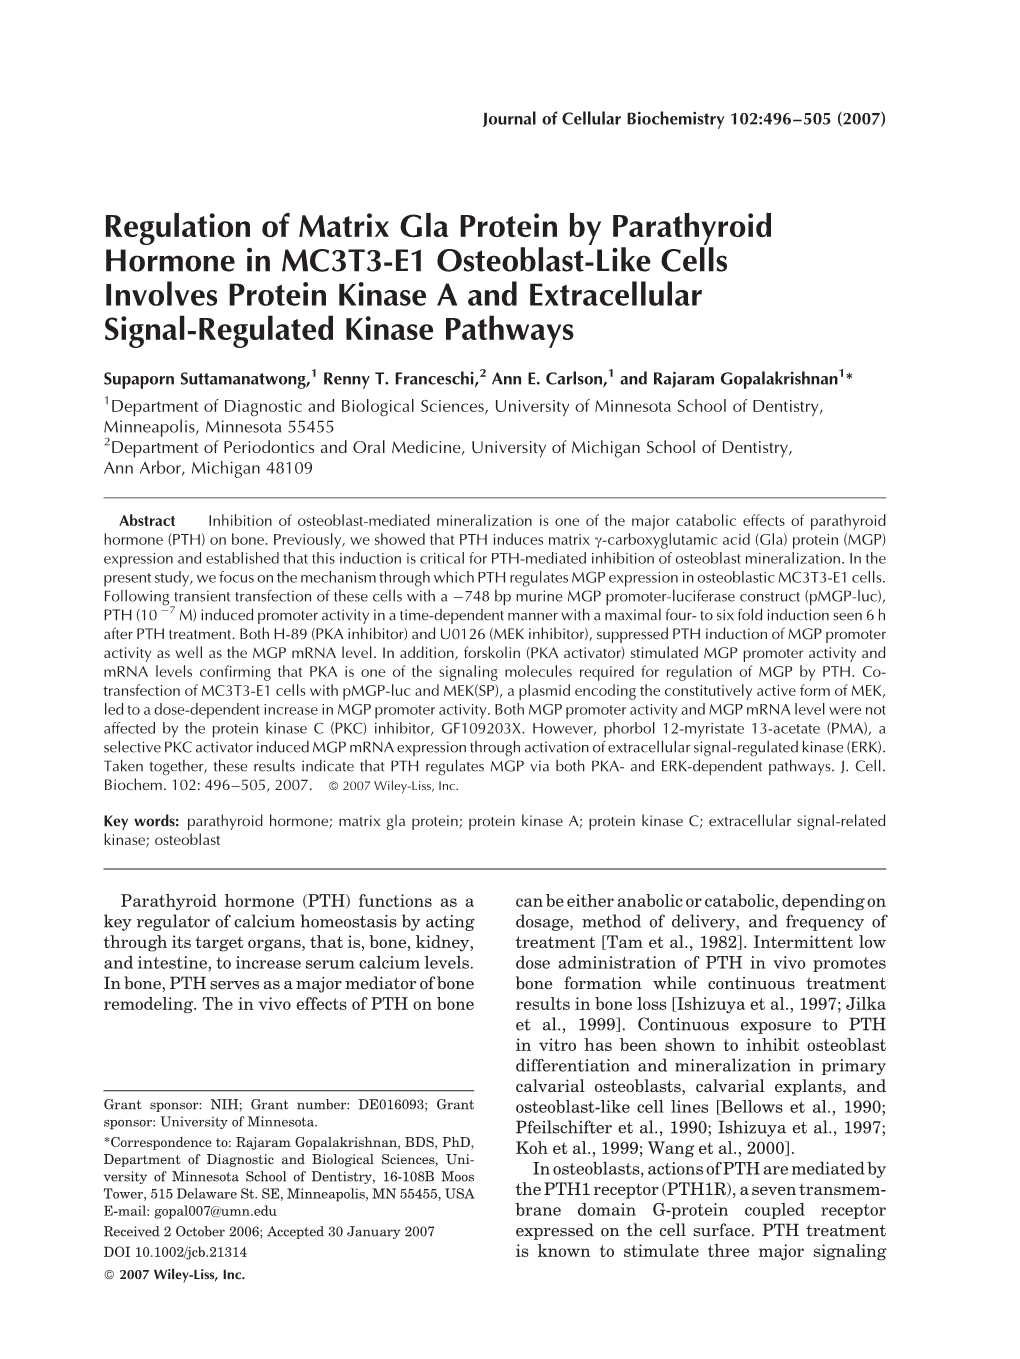 Regulation of Matrix Gla Protein by Parathyroid Hormone in MC3T3-E1 Osteoblast-Like Cells Involves Protein Kinase a and Extracellular Signal-Regulated Kinase Pathways